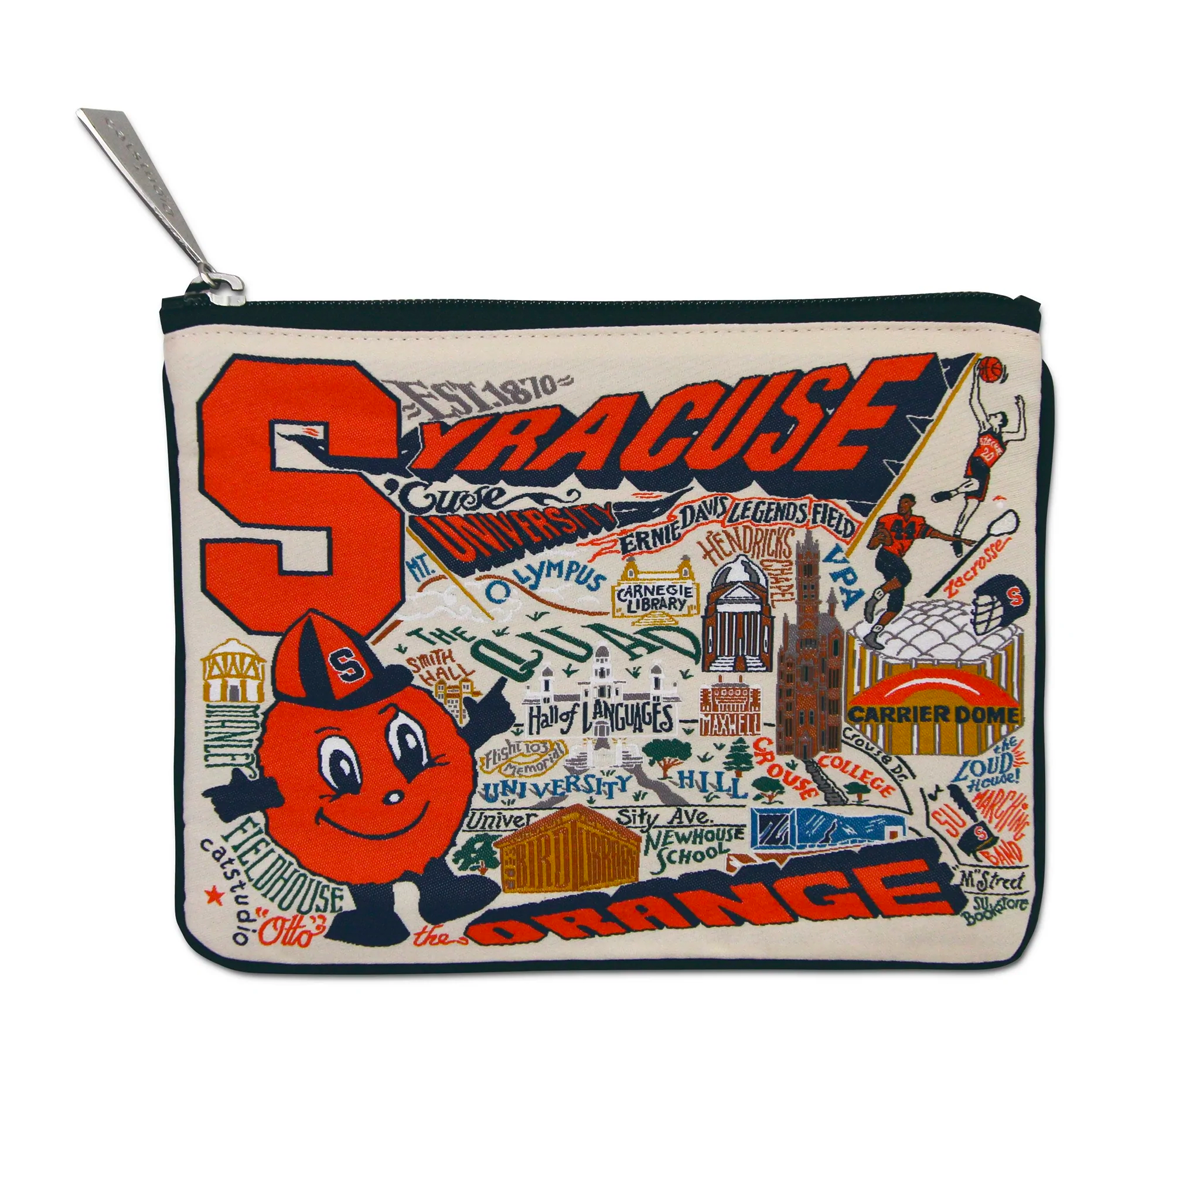 This retro pouch—available with designs referencing universities like Auburn, Syracuse, and Virginia Tech—has plenty of room for pencils, pens, flash drives, and any other campus necessities. $33, Uncommon Goods. <a href="https://www.uncommongoods.com/product/collegiate-pouches">Get it now!</a>